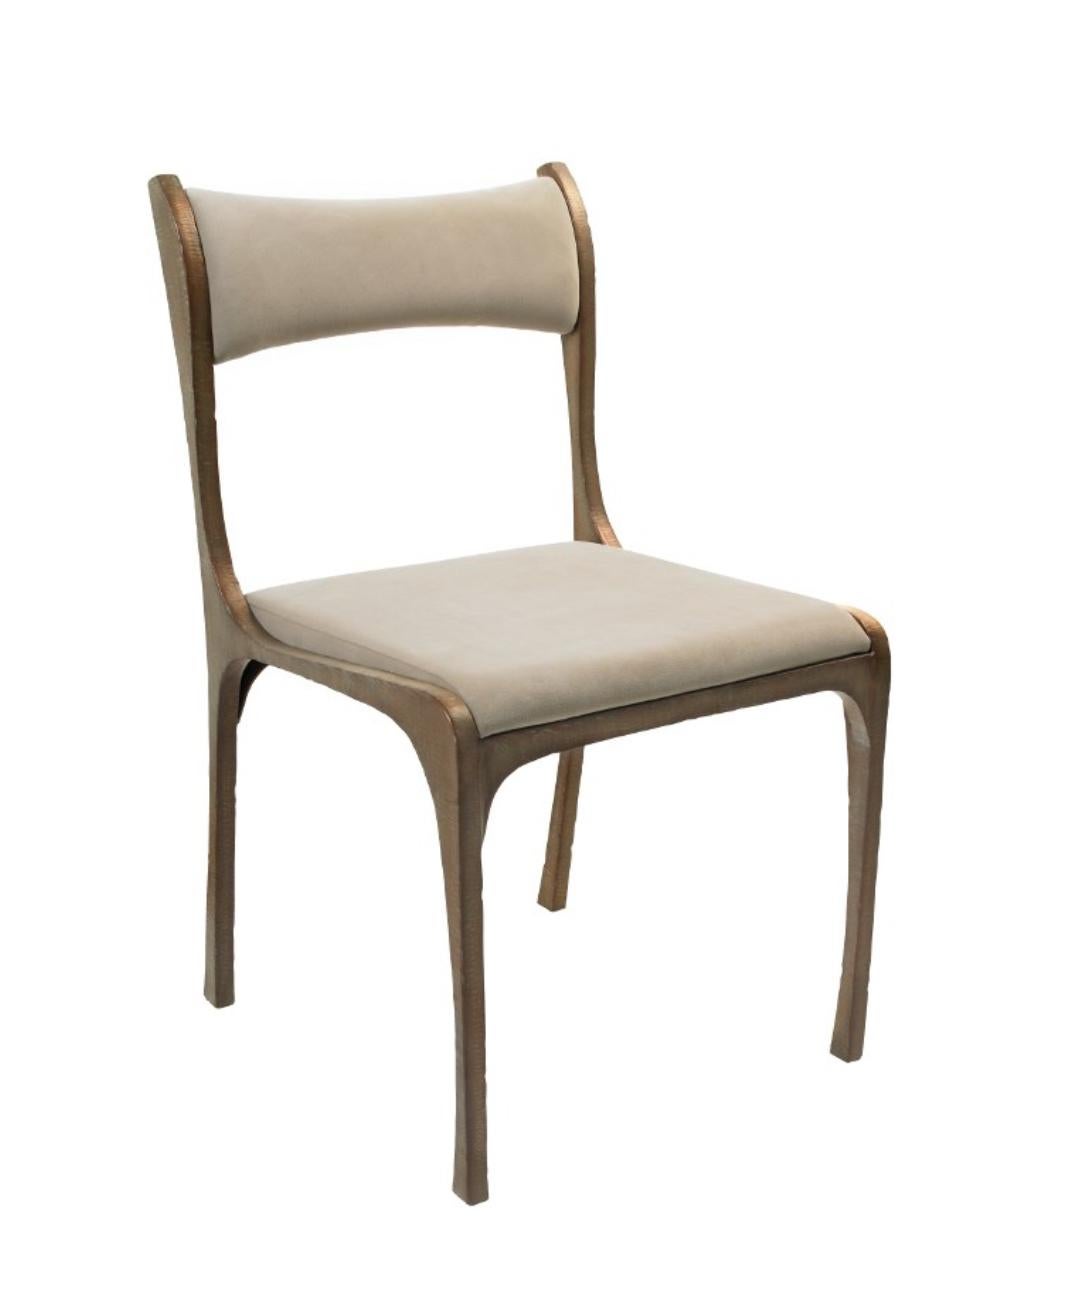 The elegant metal frame of this chair is a slightly hammered verdigris. Upholstered in cotton velveteen.

Overall Dimensions:
20 × 19.5 × 34 in


Color:
Olive

Availability:
Currently in-stock and ready to ship

No assembly required